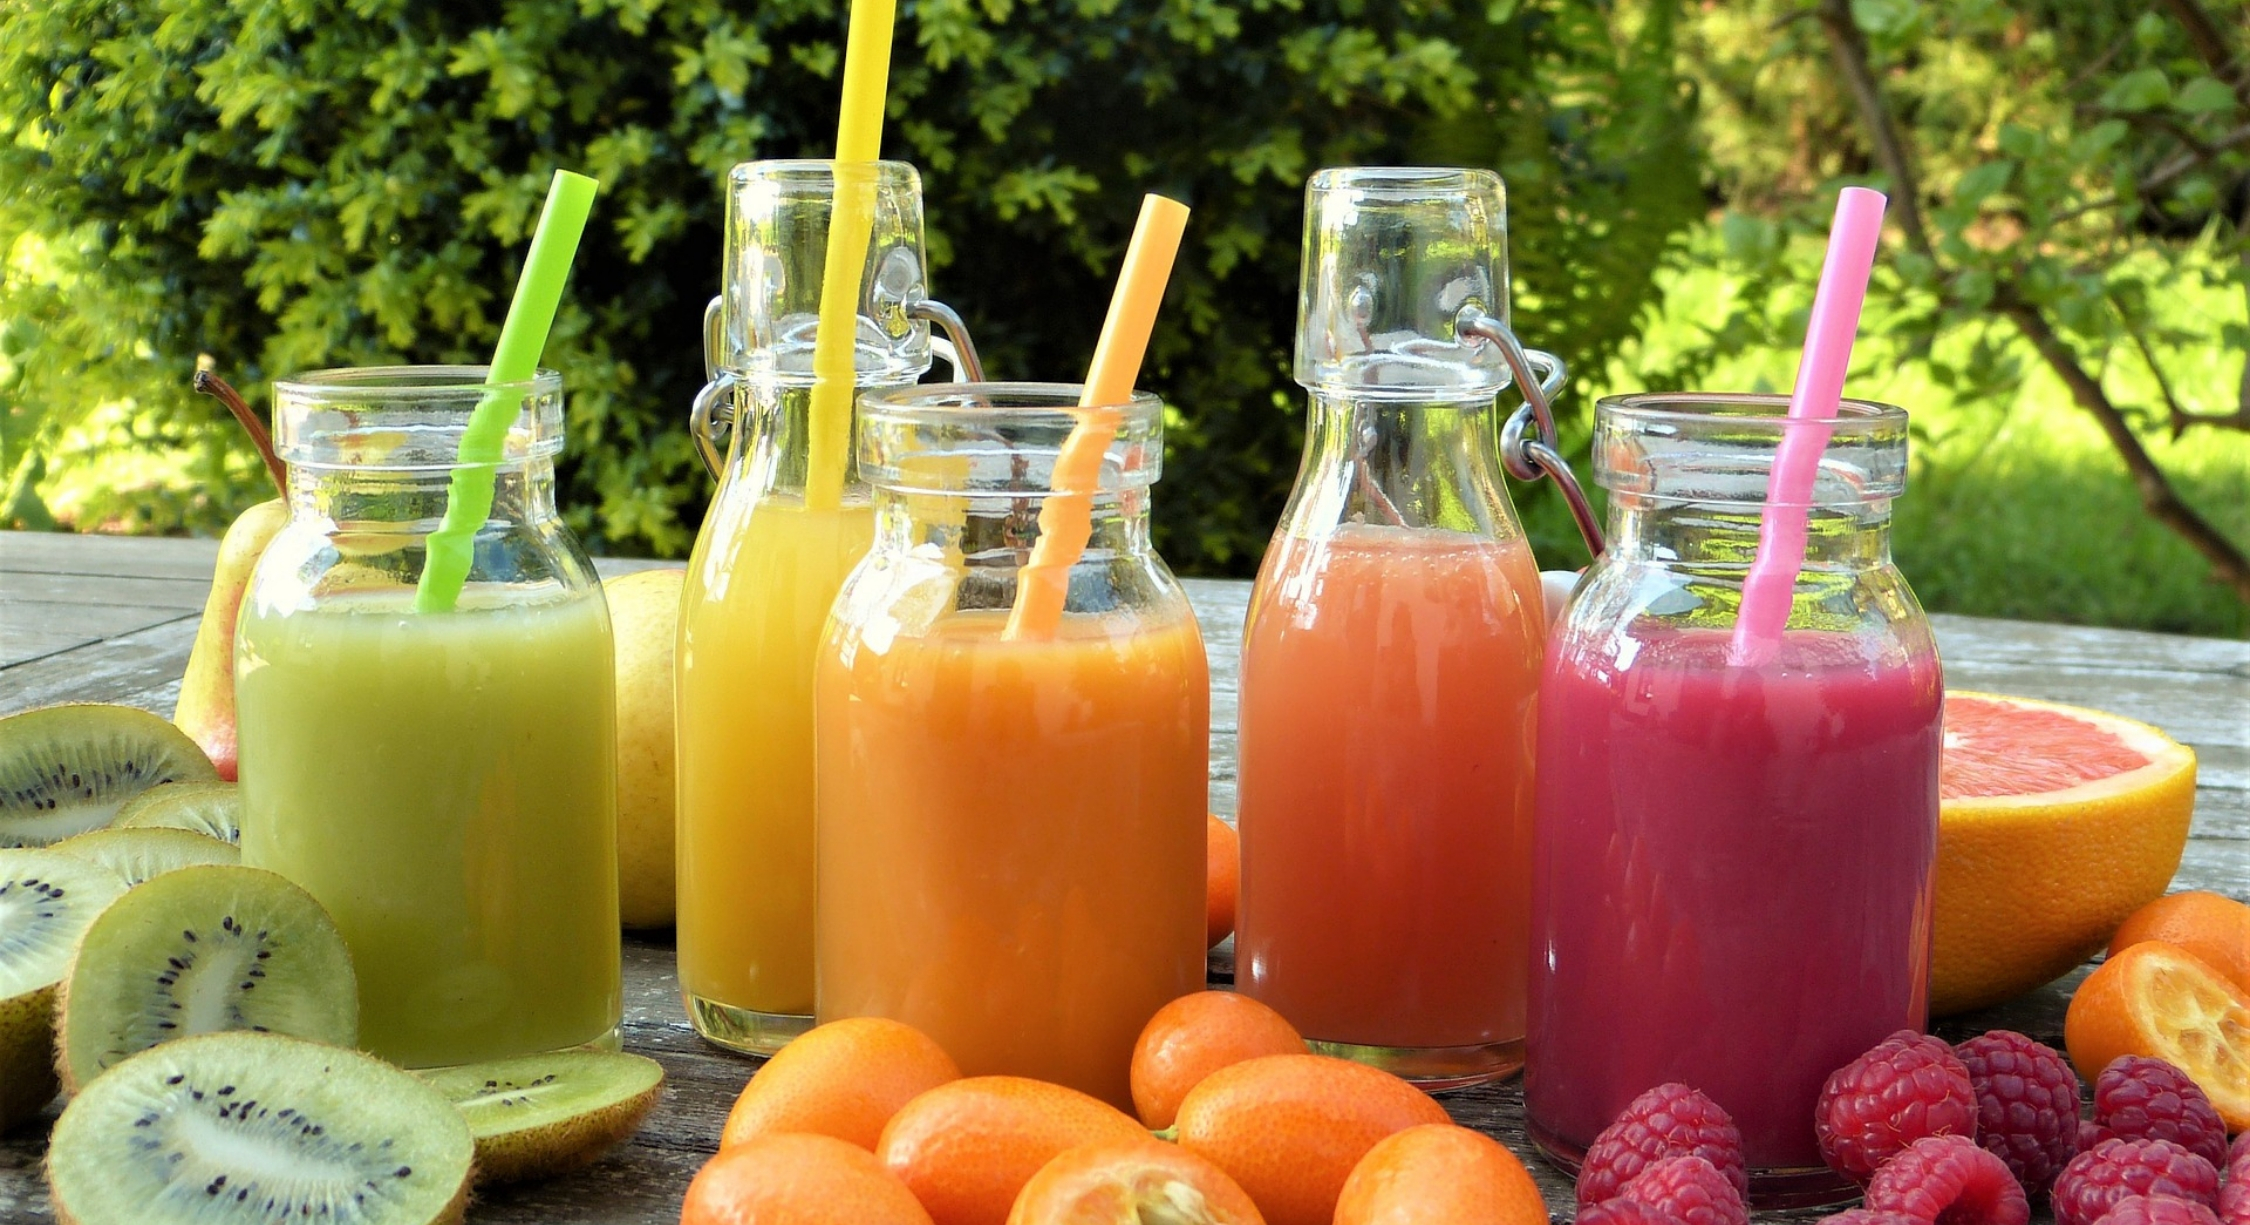 Juice cleanses and detoxes - do they work